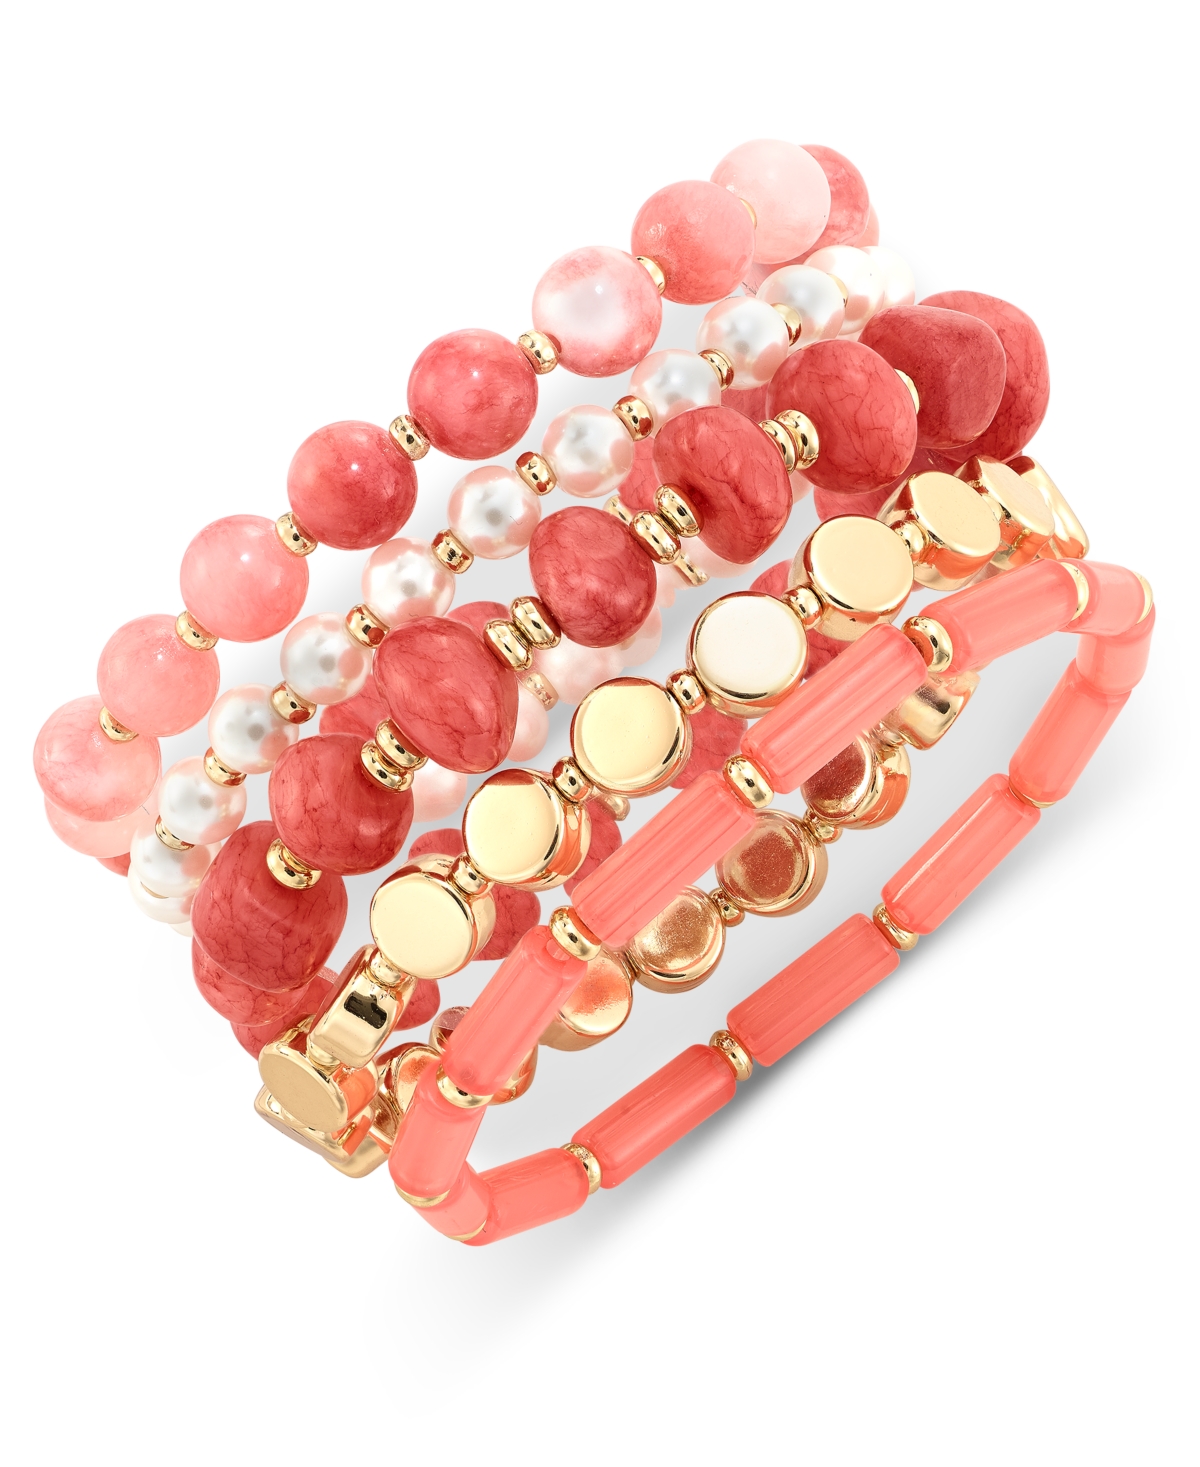 5-Pc. Set Stone & Bead Stretch Bracelets, Created for Macy's - Coral